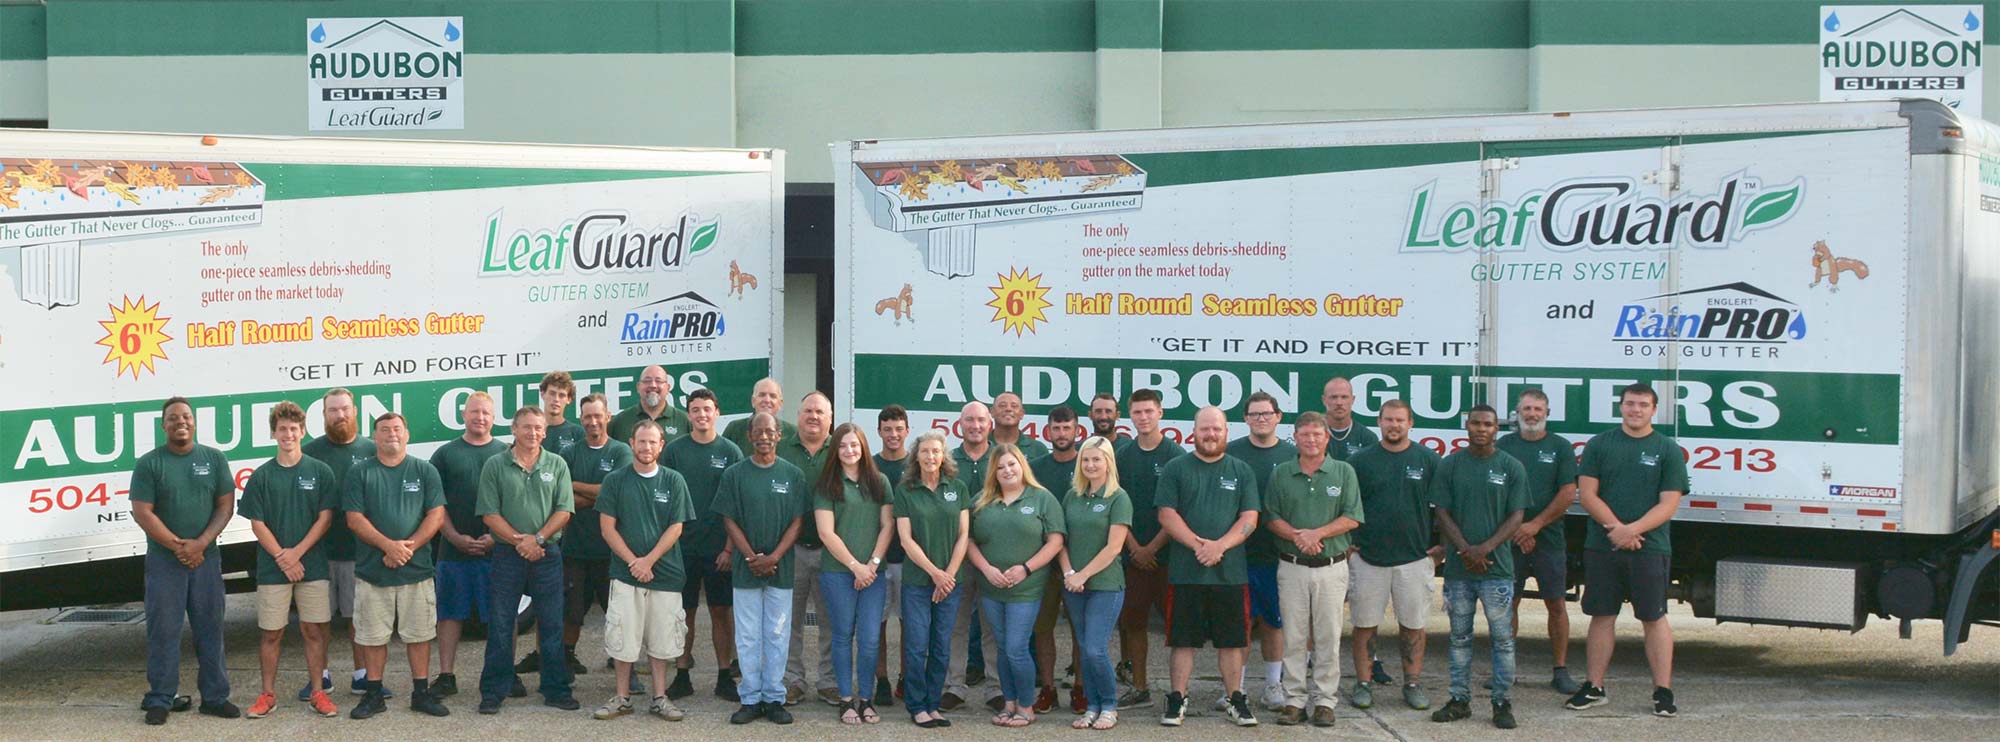 New Company Picture Ag Staff Cropped 20192